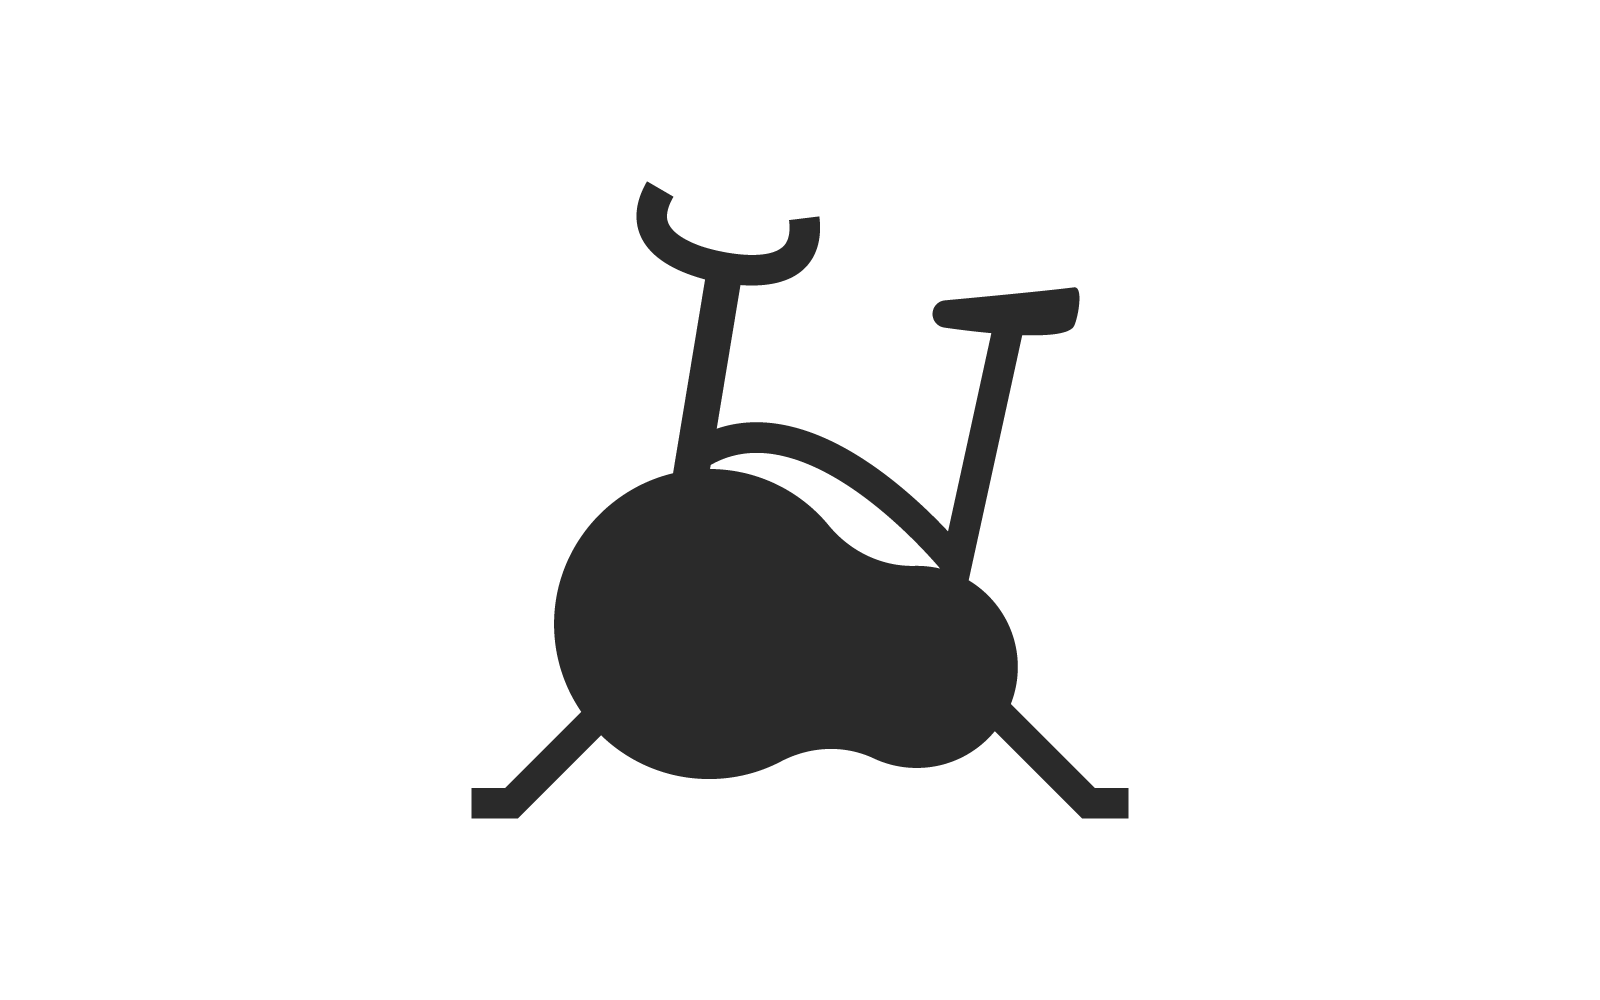 Exercise bicycle fitness icon flat design template